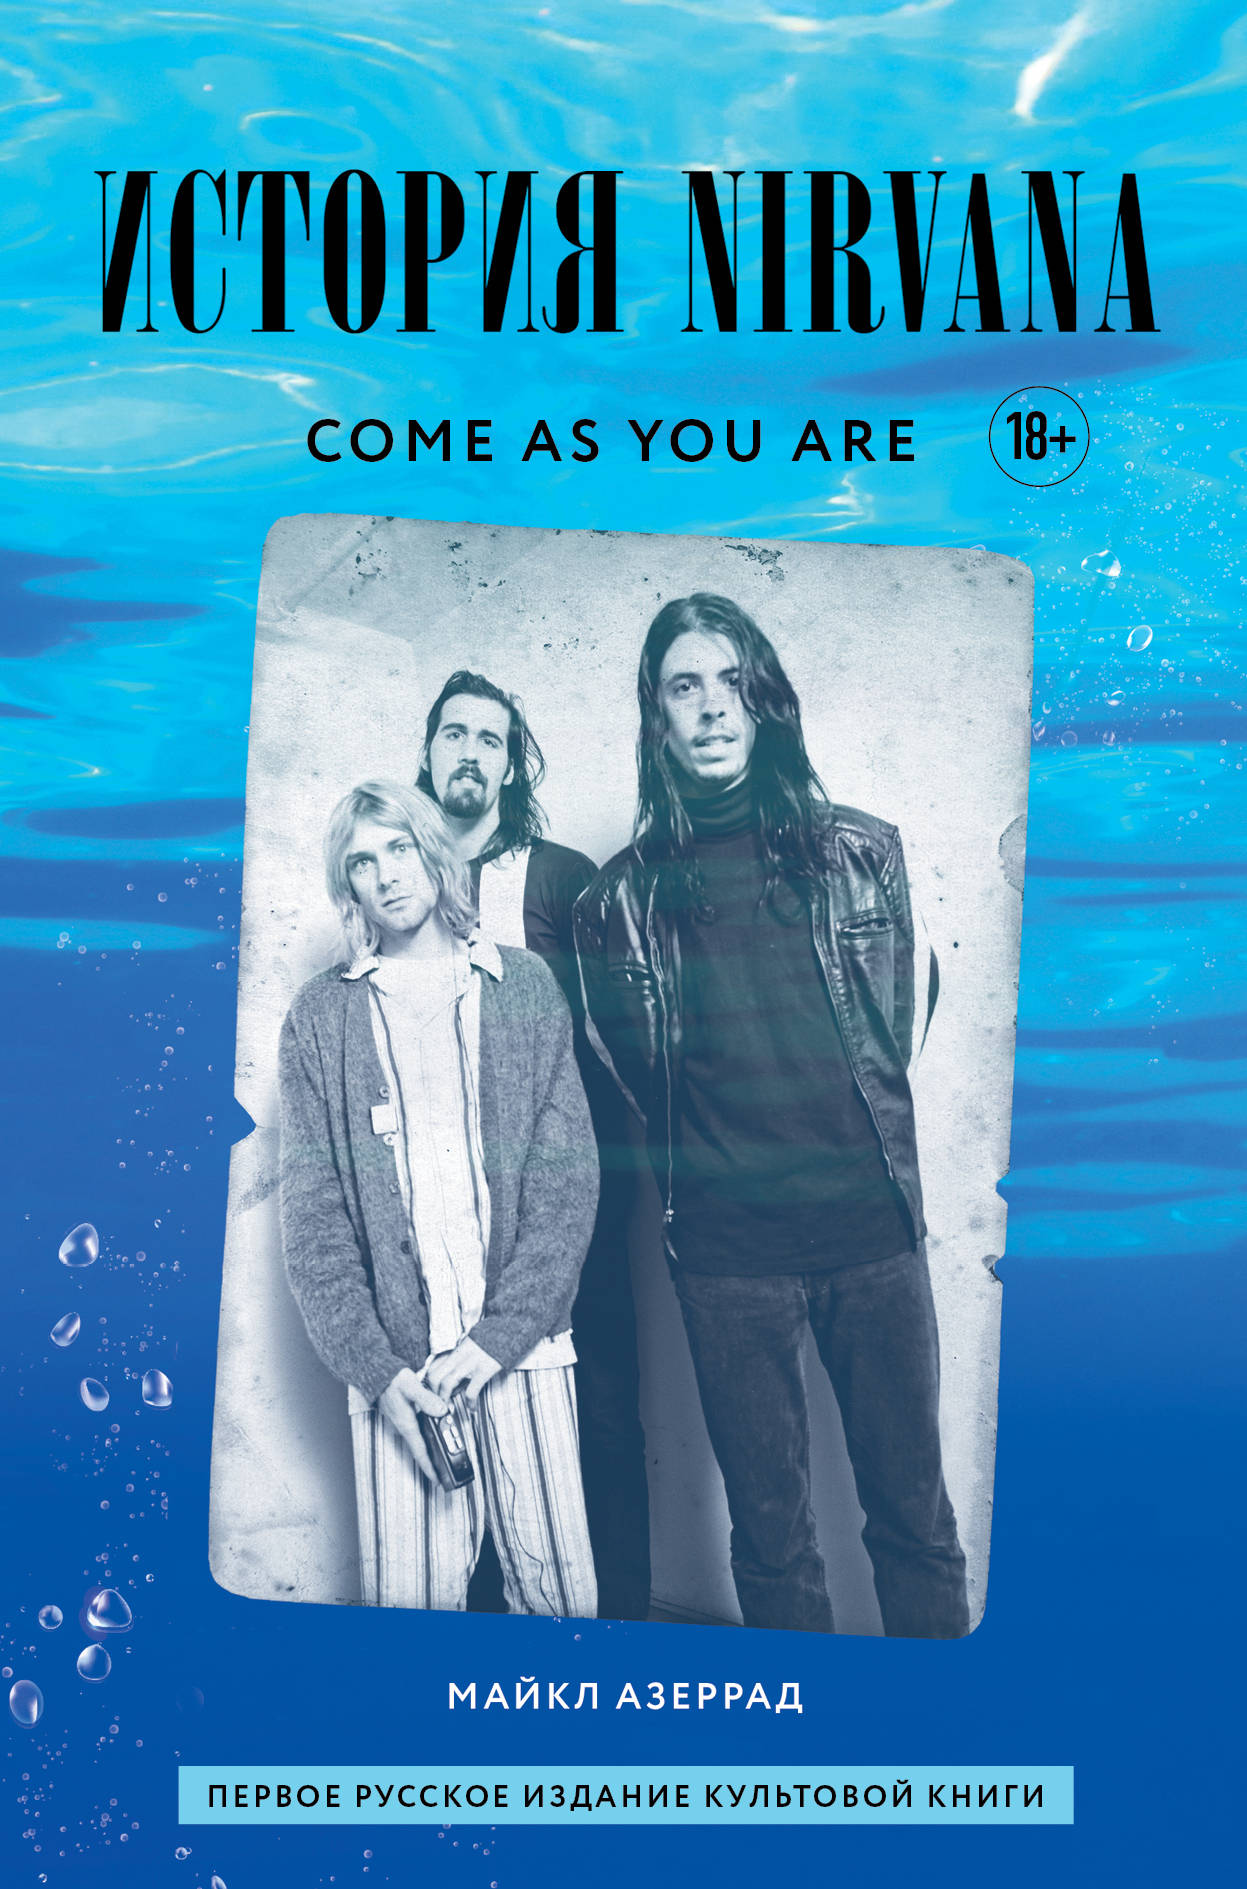 Come as you are:  Nirvana,       